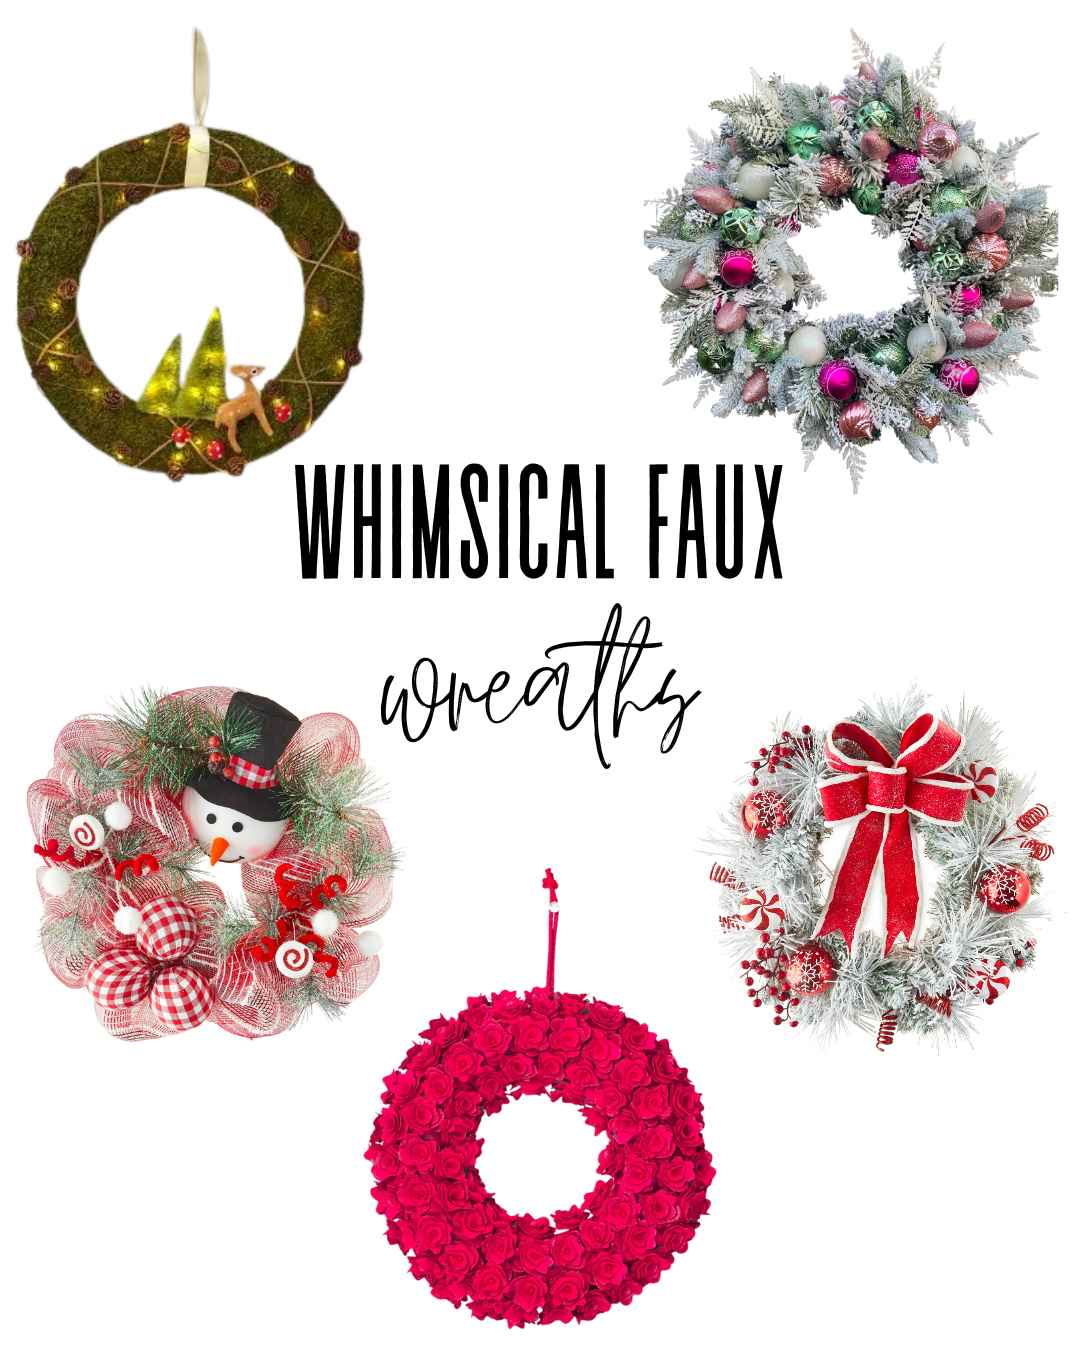 5 whimsical faux wreath ideas for the holidays